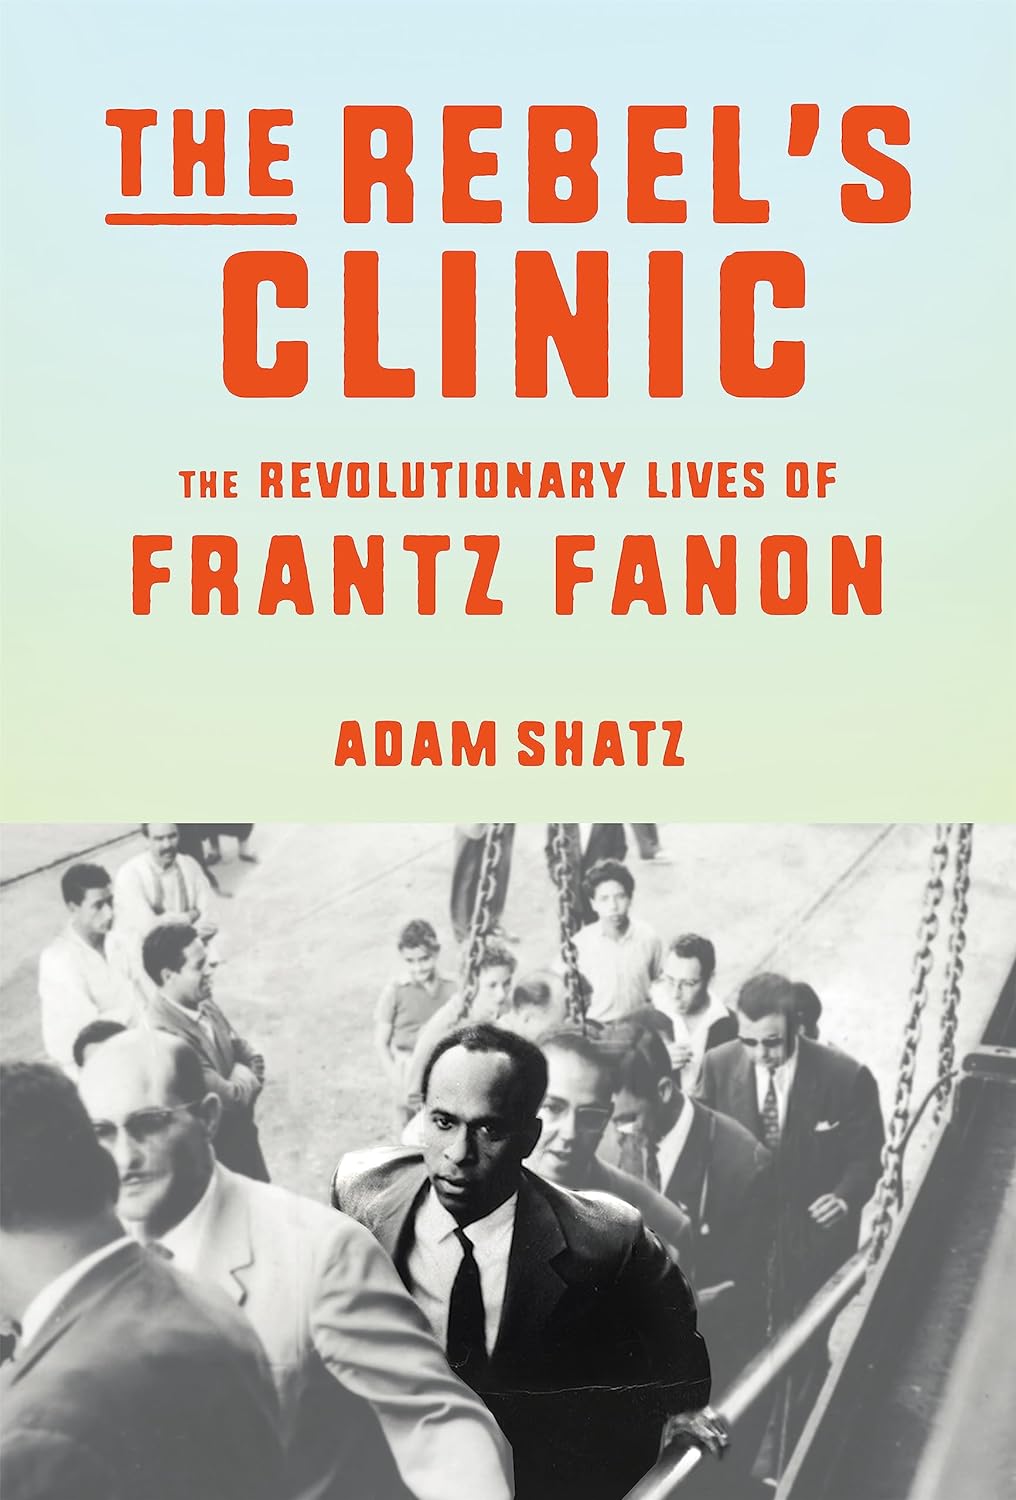 The cover of The Rebel’s Clinic: The Revolutionary Lives of Frantz Fanon